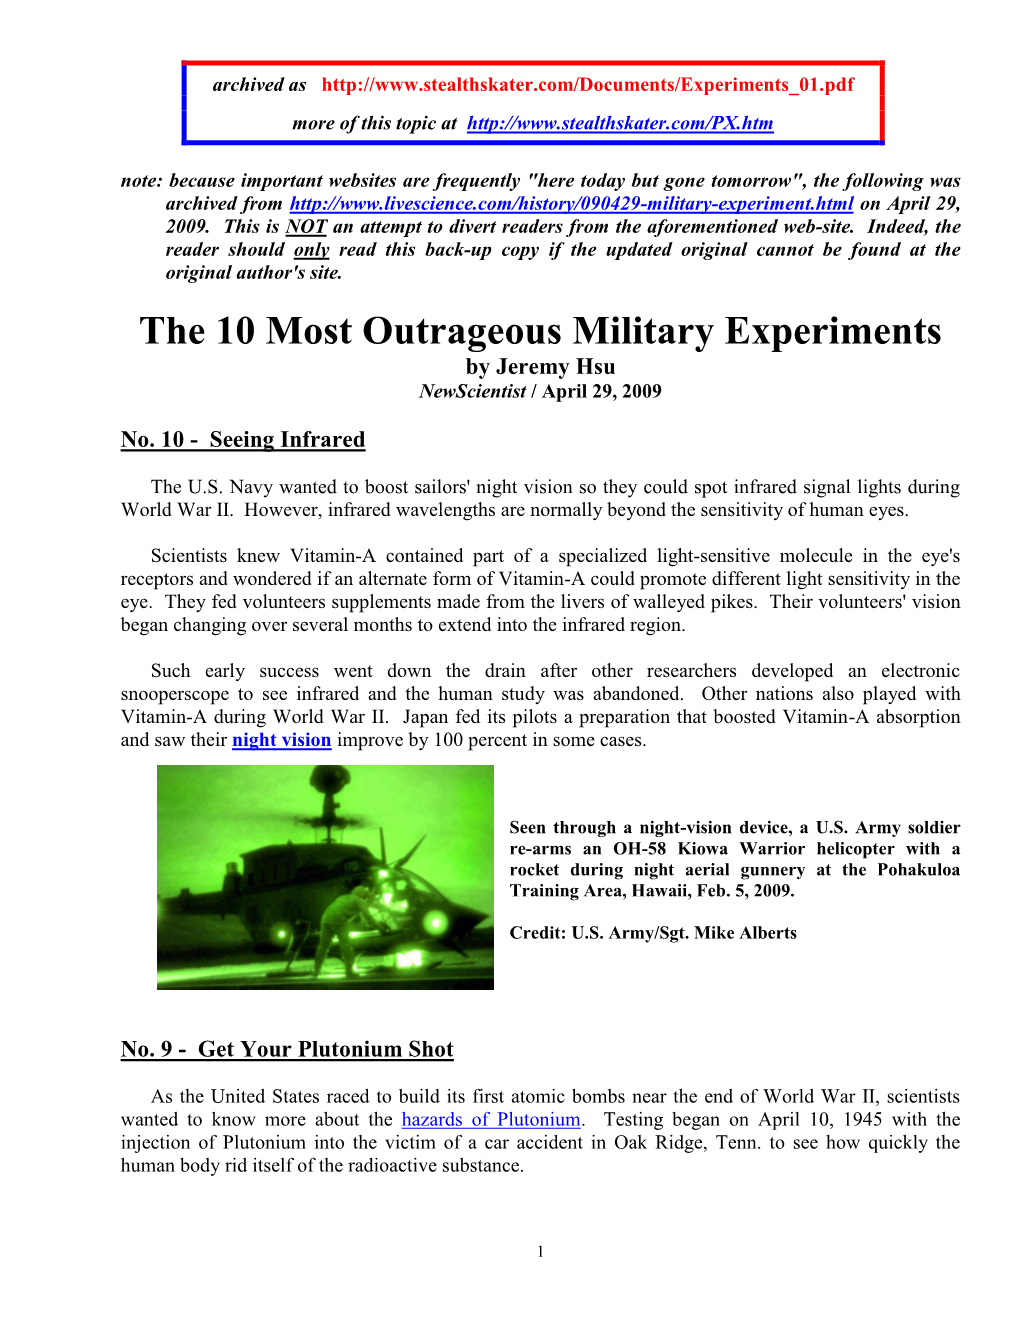 The 10 Most Outrageous Military Experiments by Jeremy Hsu Newscientist / April 29, 2009